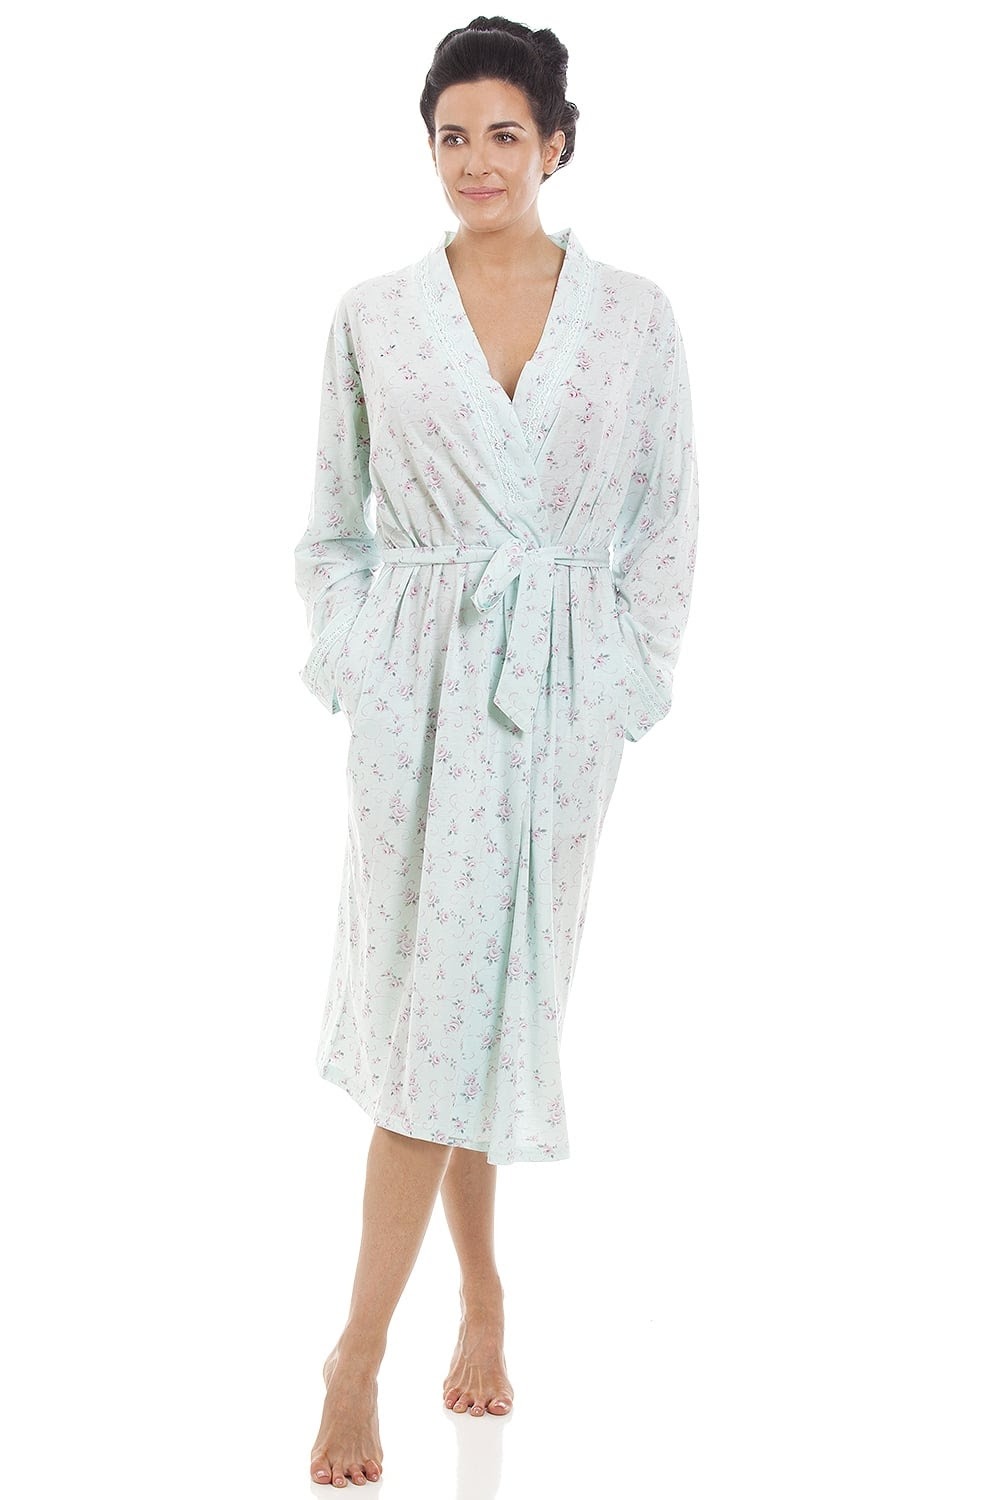 Selecting Ladies Dressing Gowns and Kerchiefs